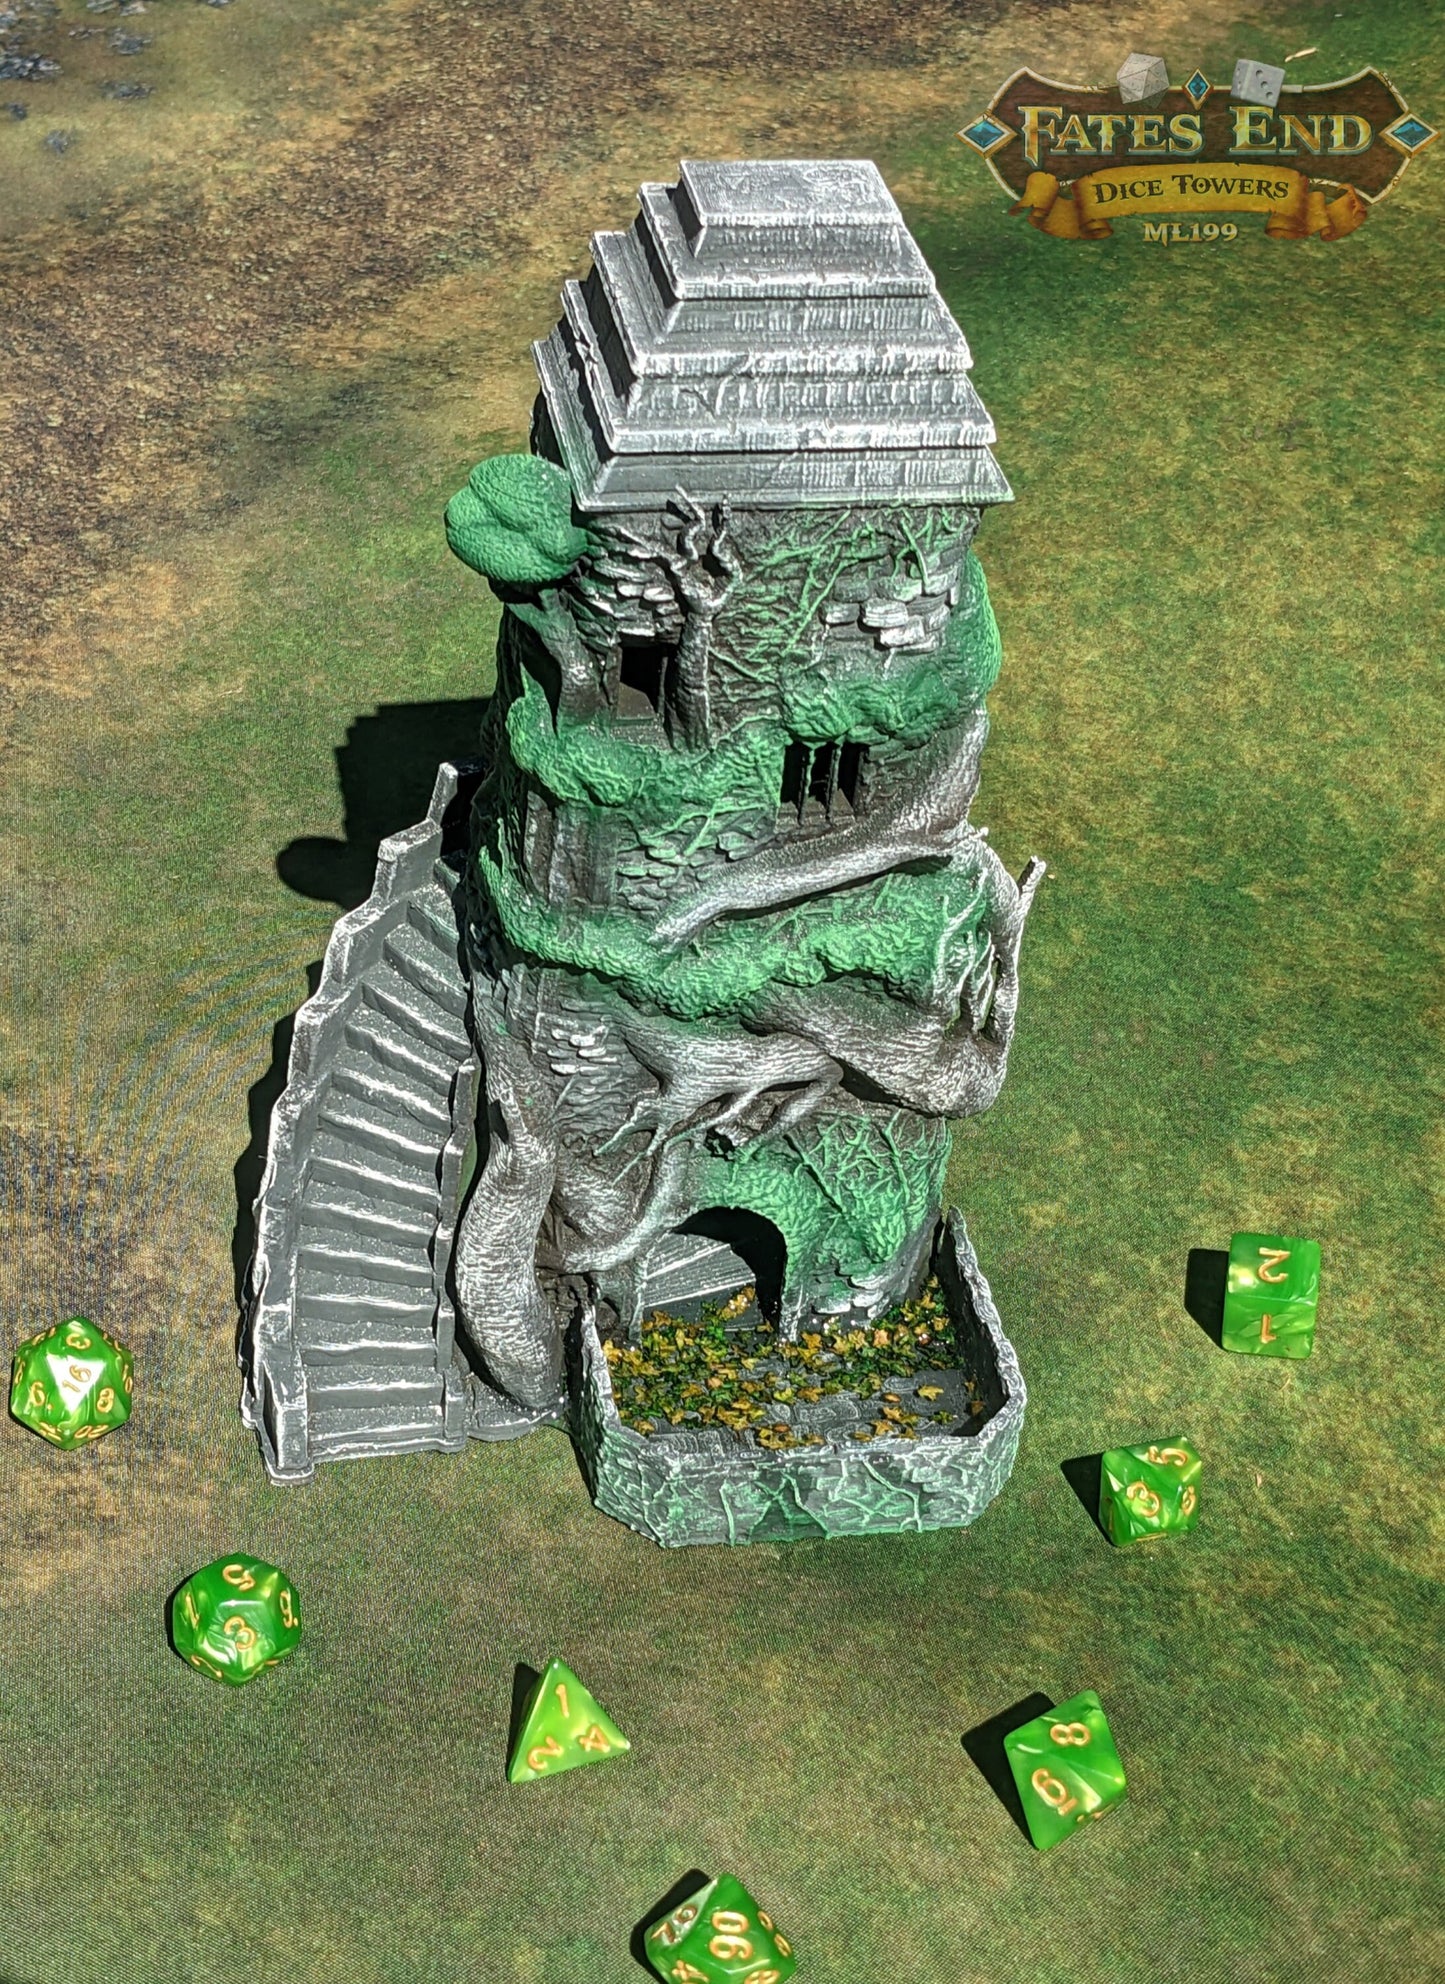 Centaur Dice Tower - Fate's End Collection - Gallop Through Mythical Realms with Every Thundering Roll.